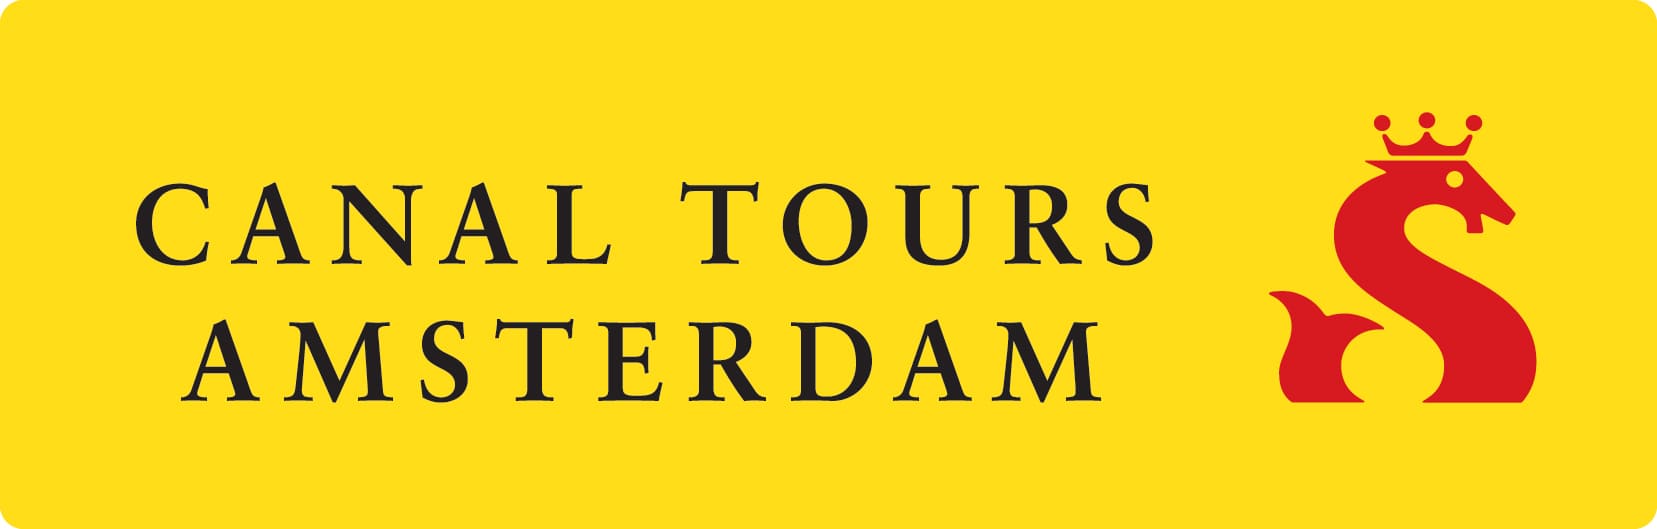 canaltours_amsterdam compressed.jpg